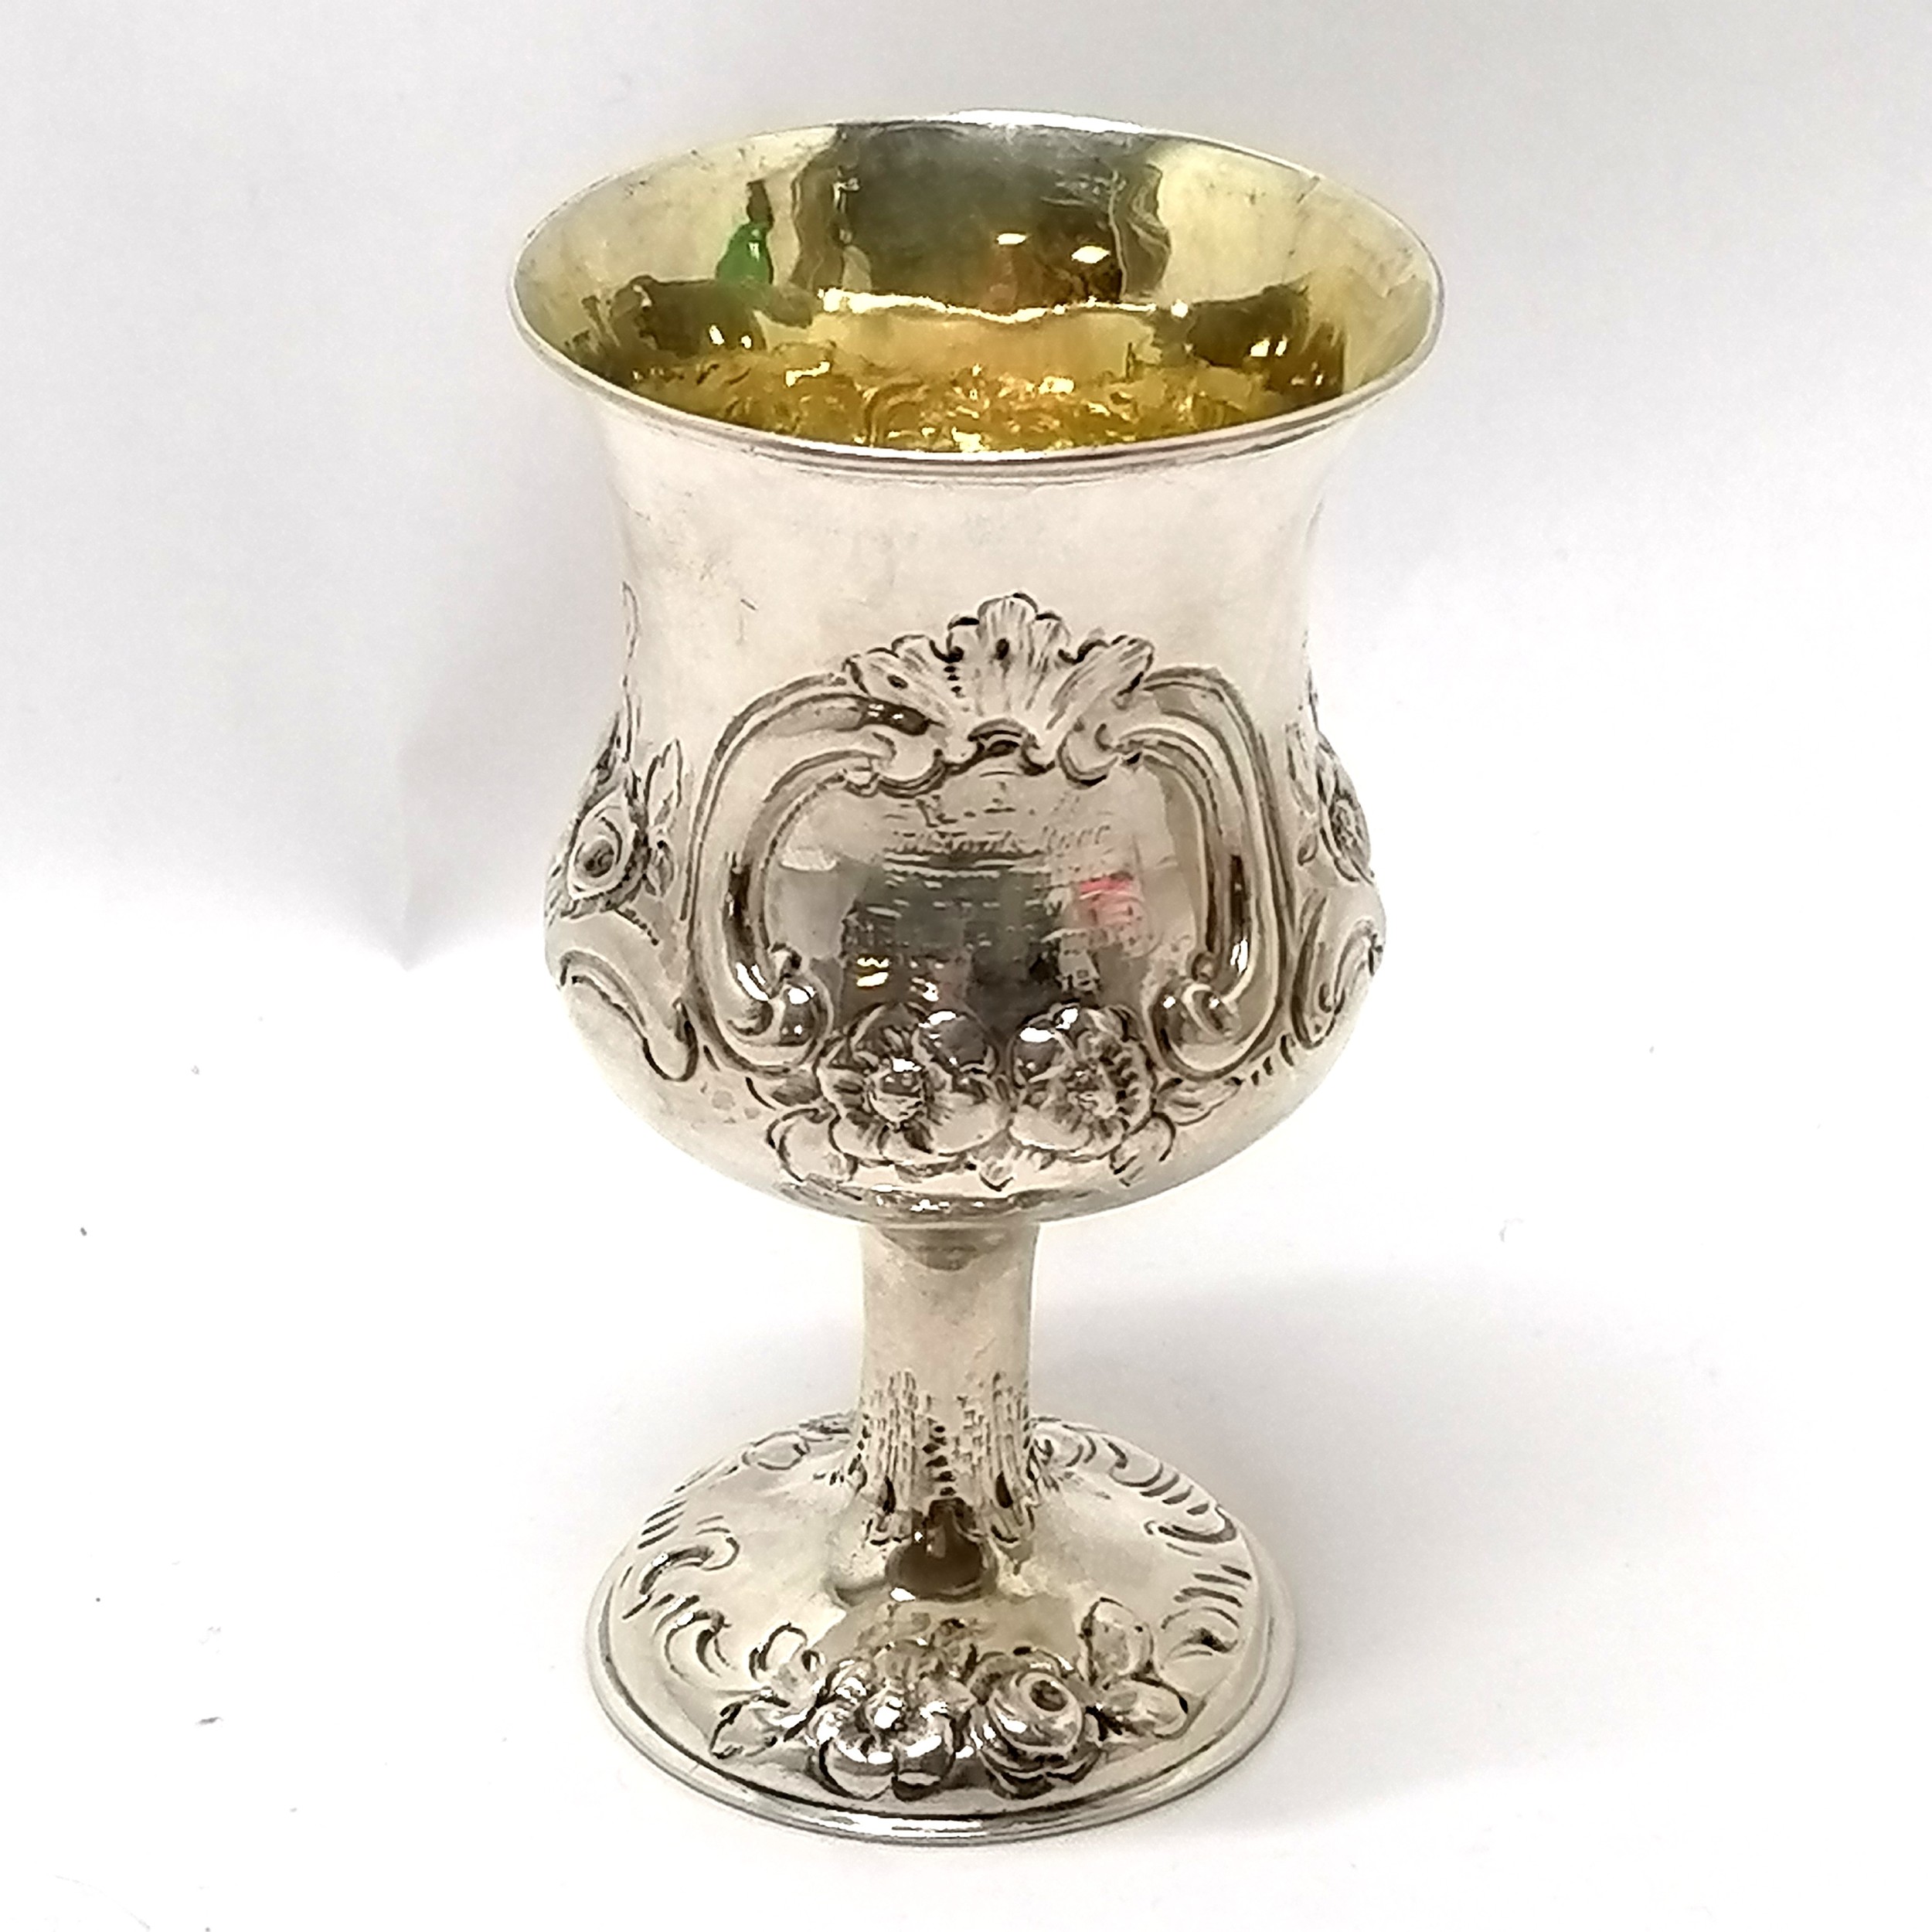 1863 silver goblet (with gilt interior) by Robert Harper (?) - 13cm & 97g total weight ~ has